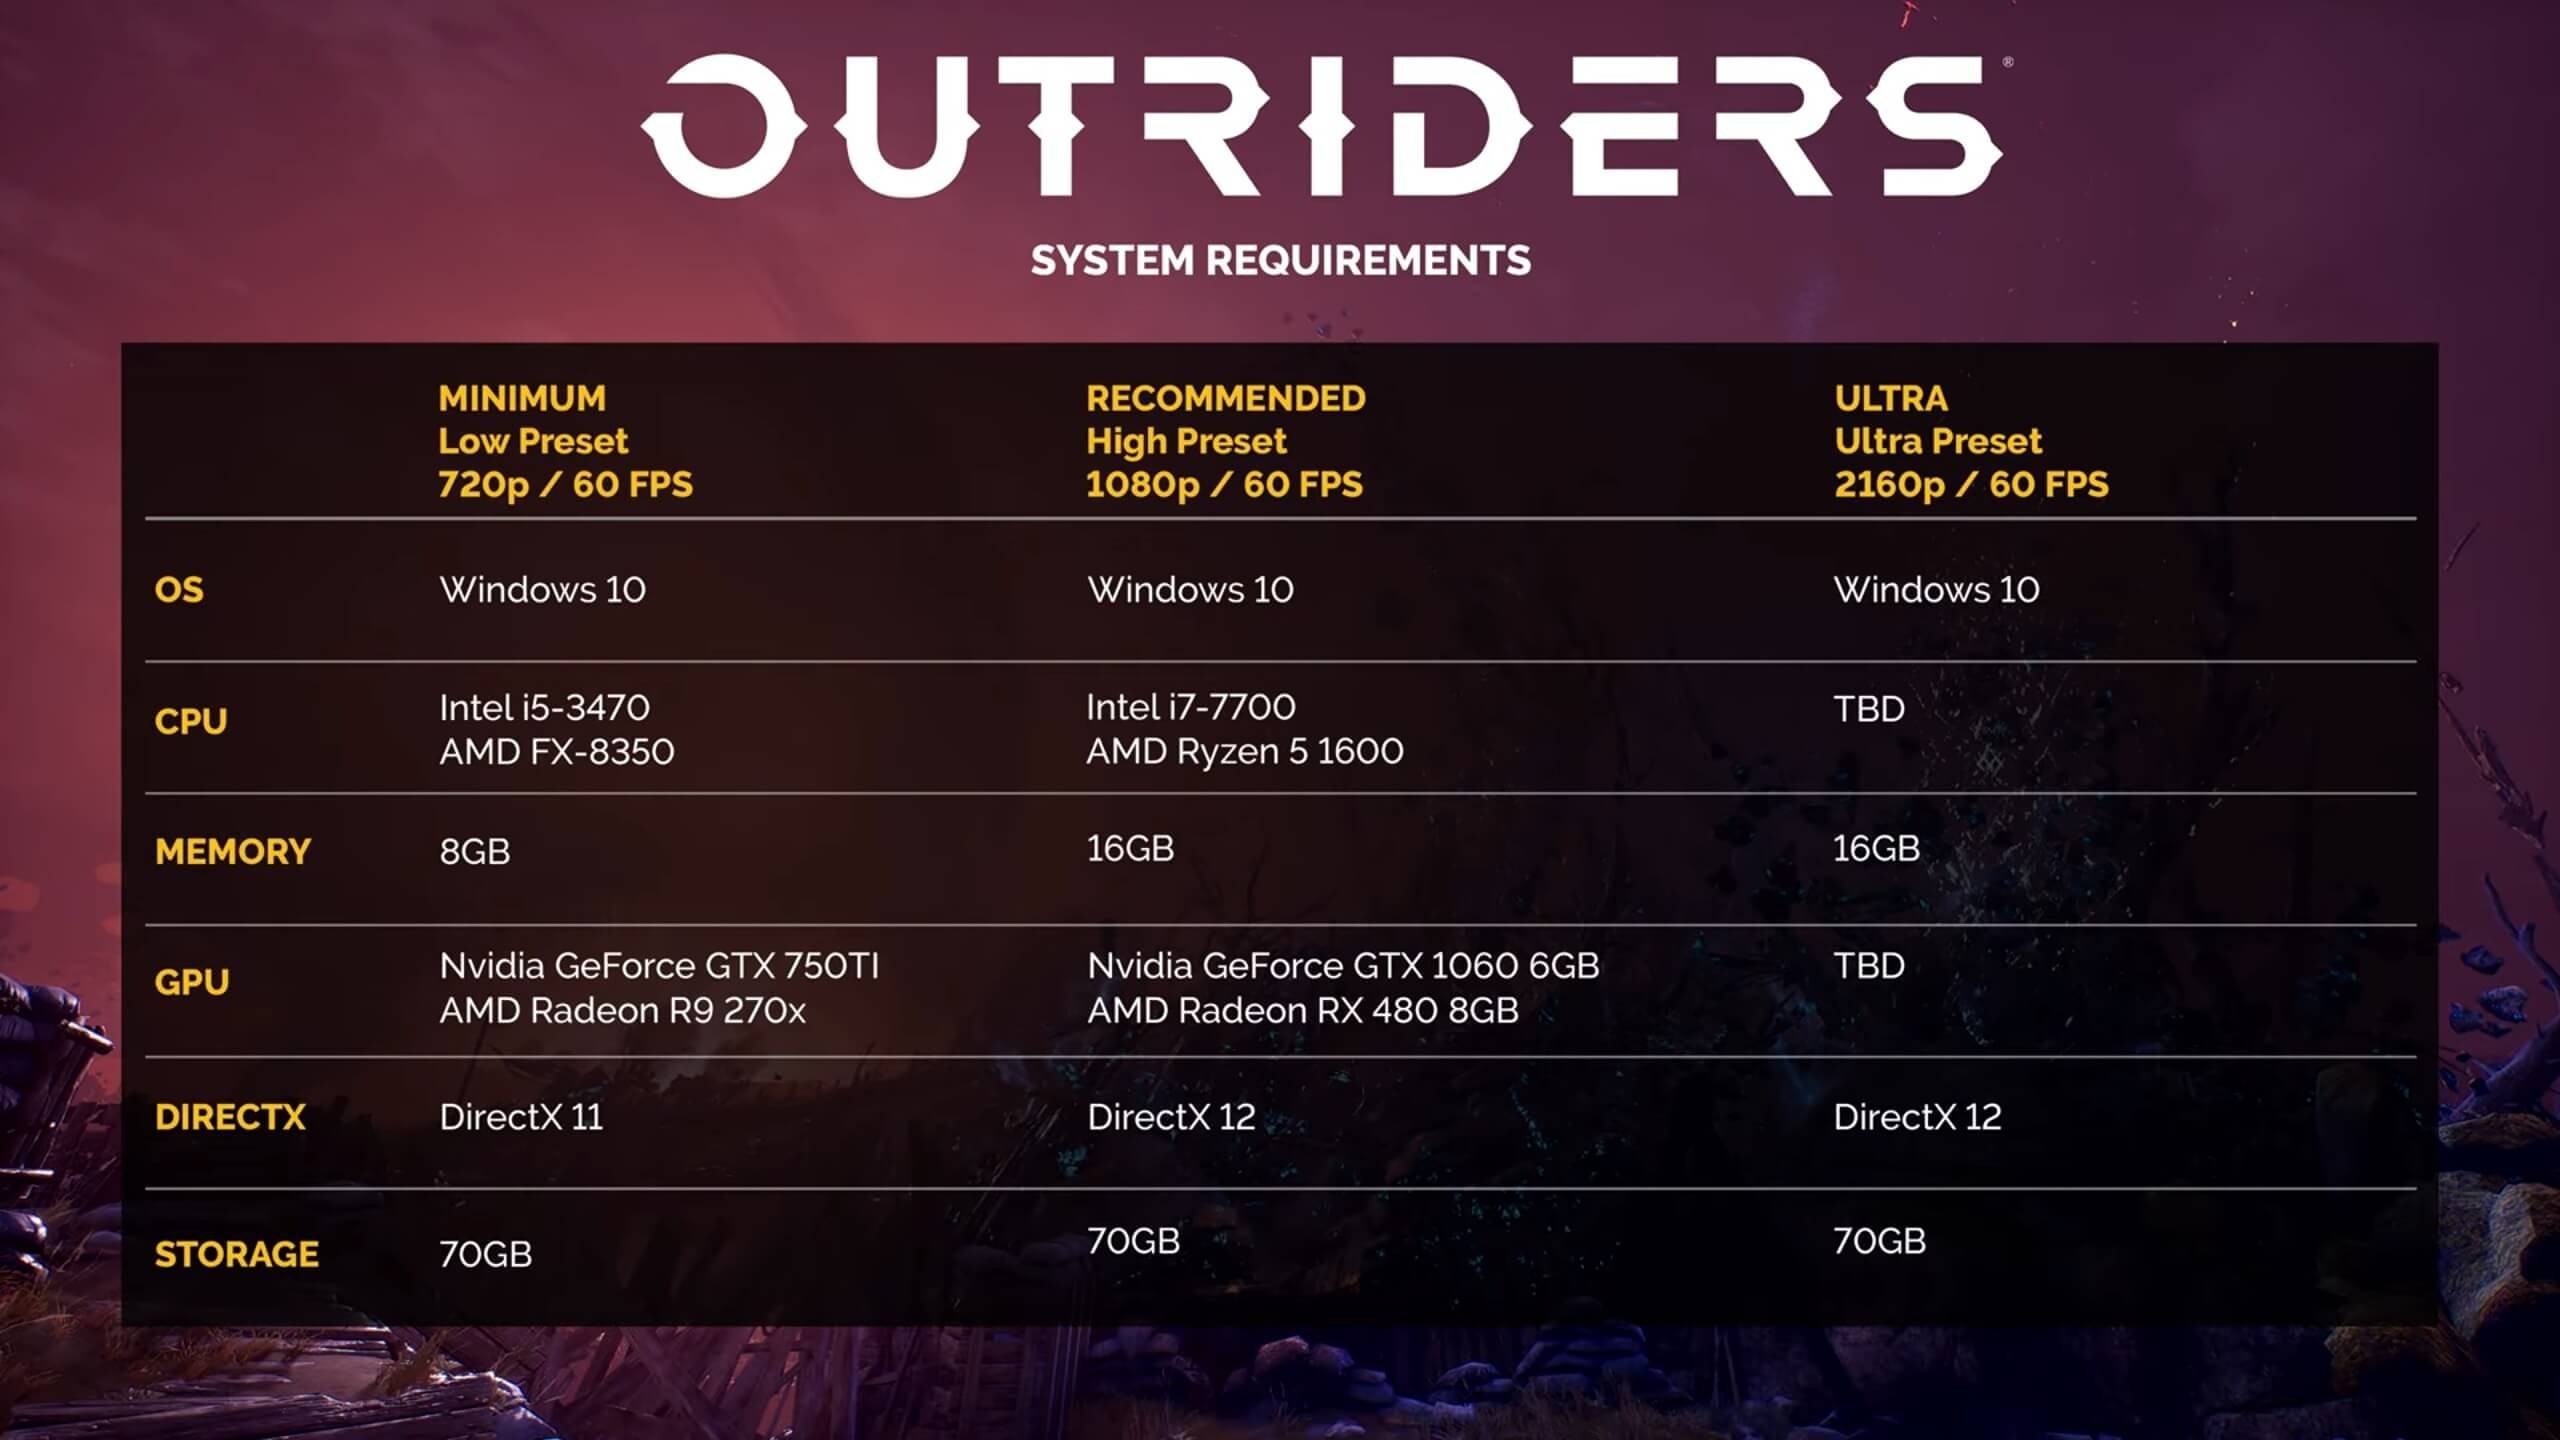 directx 11 vs 12 outriders